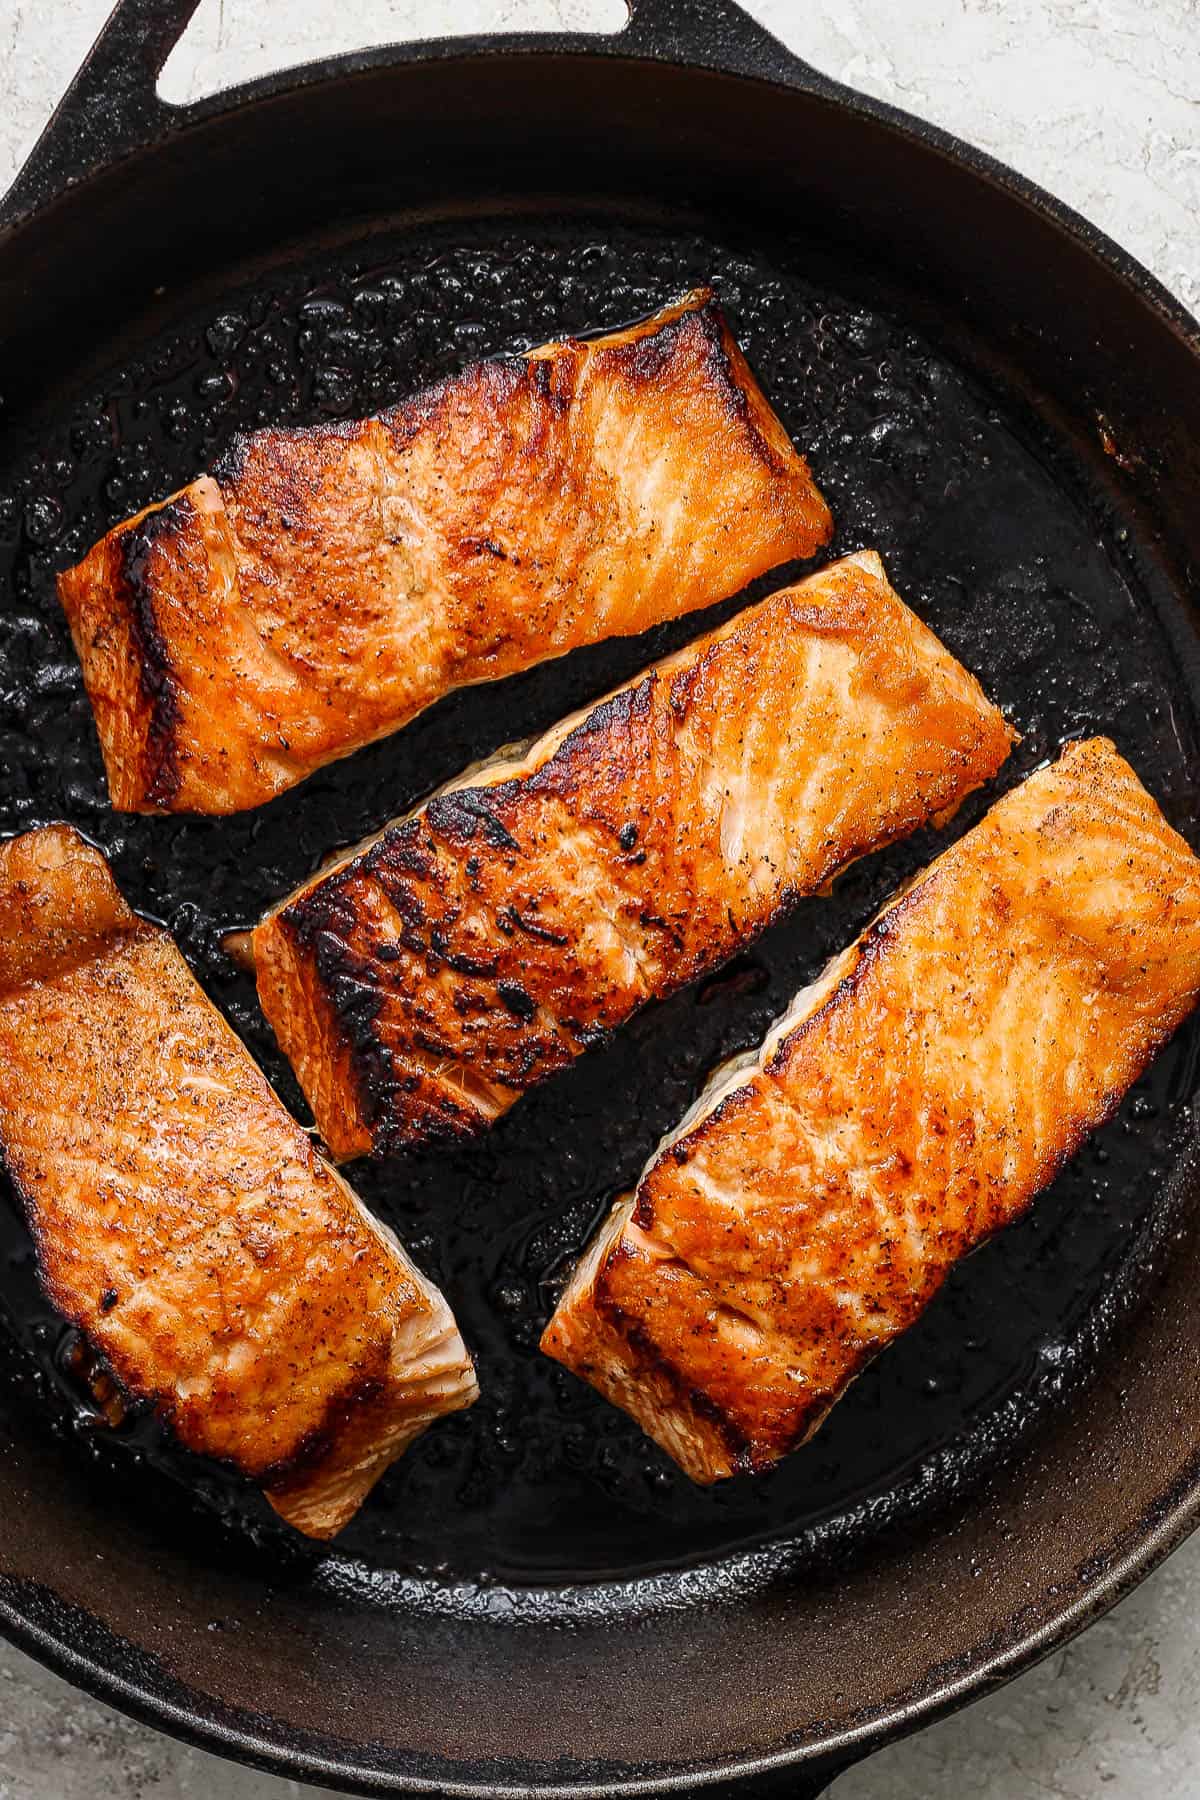 Salmon fillets in a skillet after being flipped and the skin-side is now down.